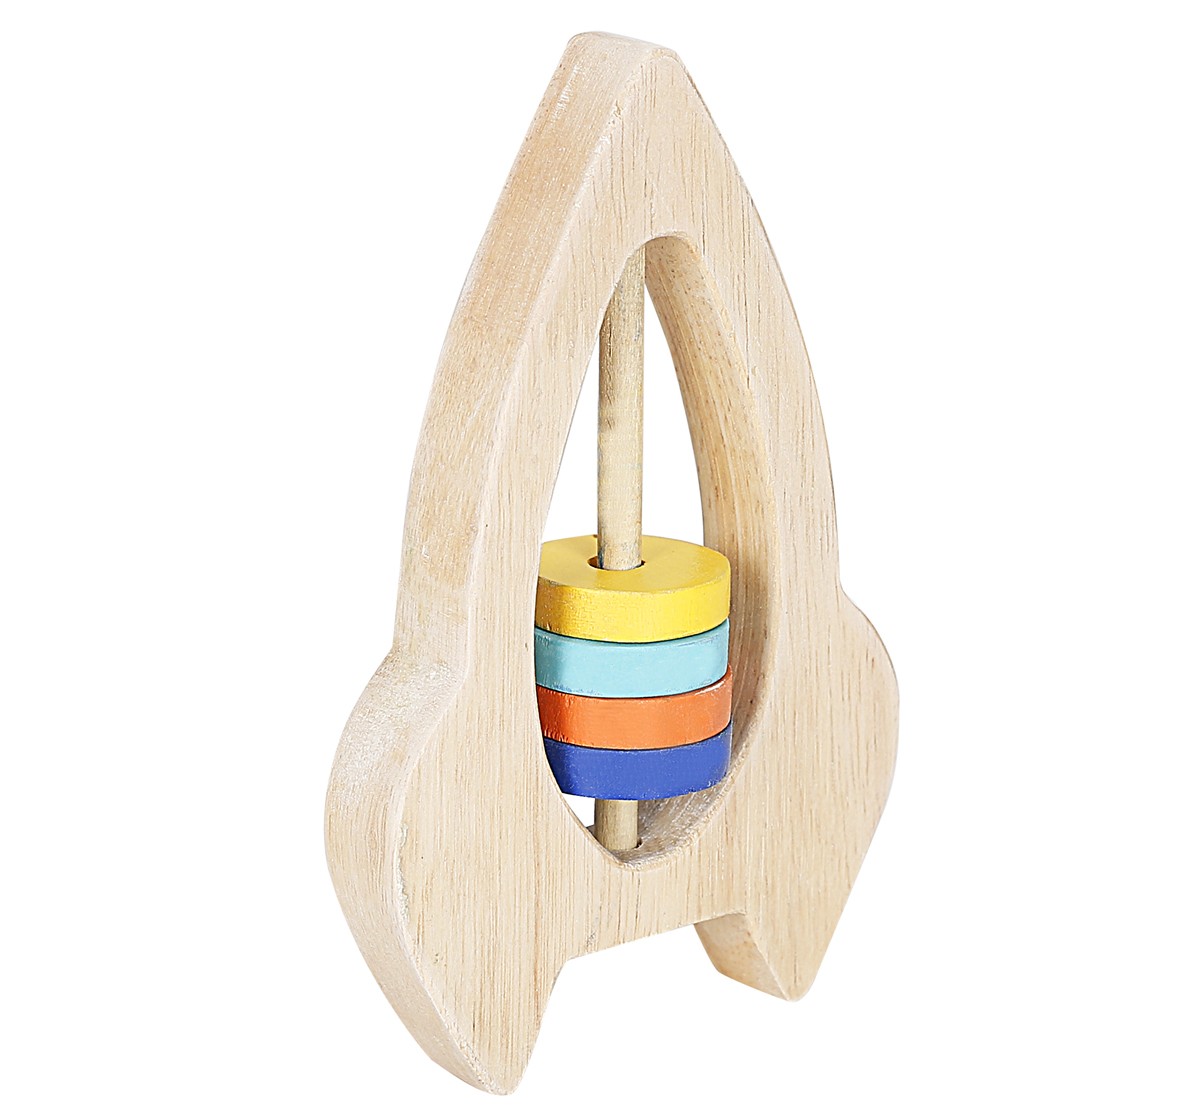 Shooting Star Wooden Rocket Rattle for kids 3Y+, Multicolour